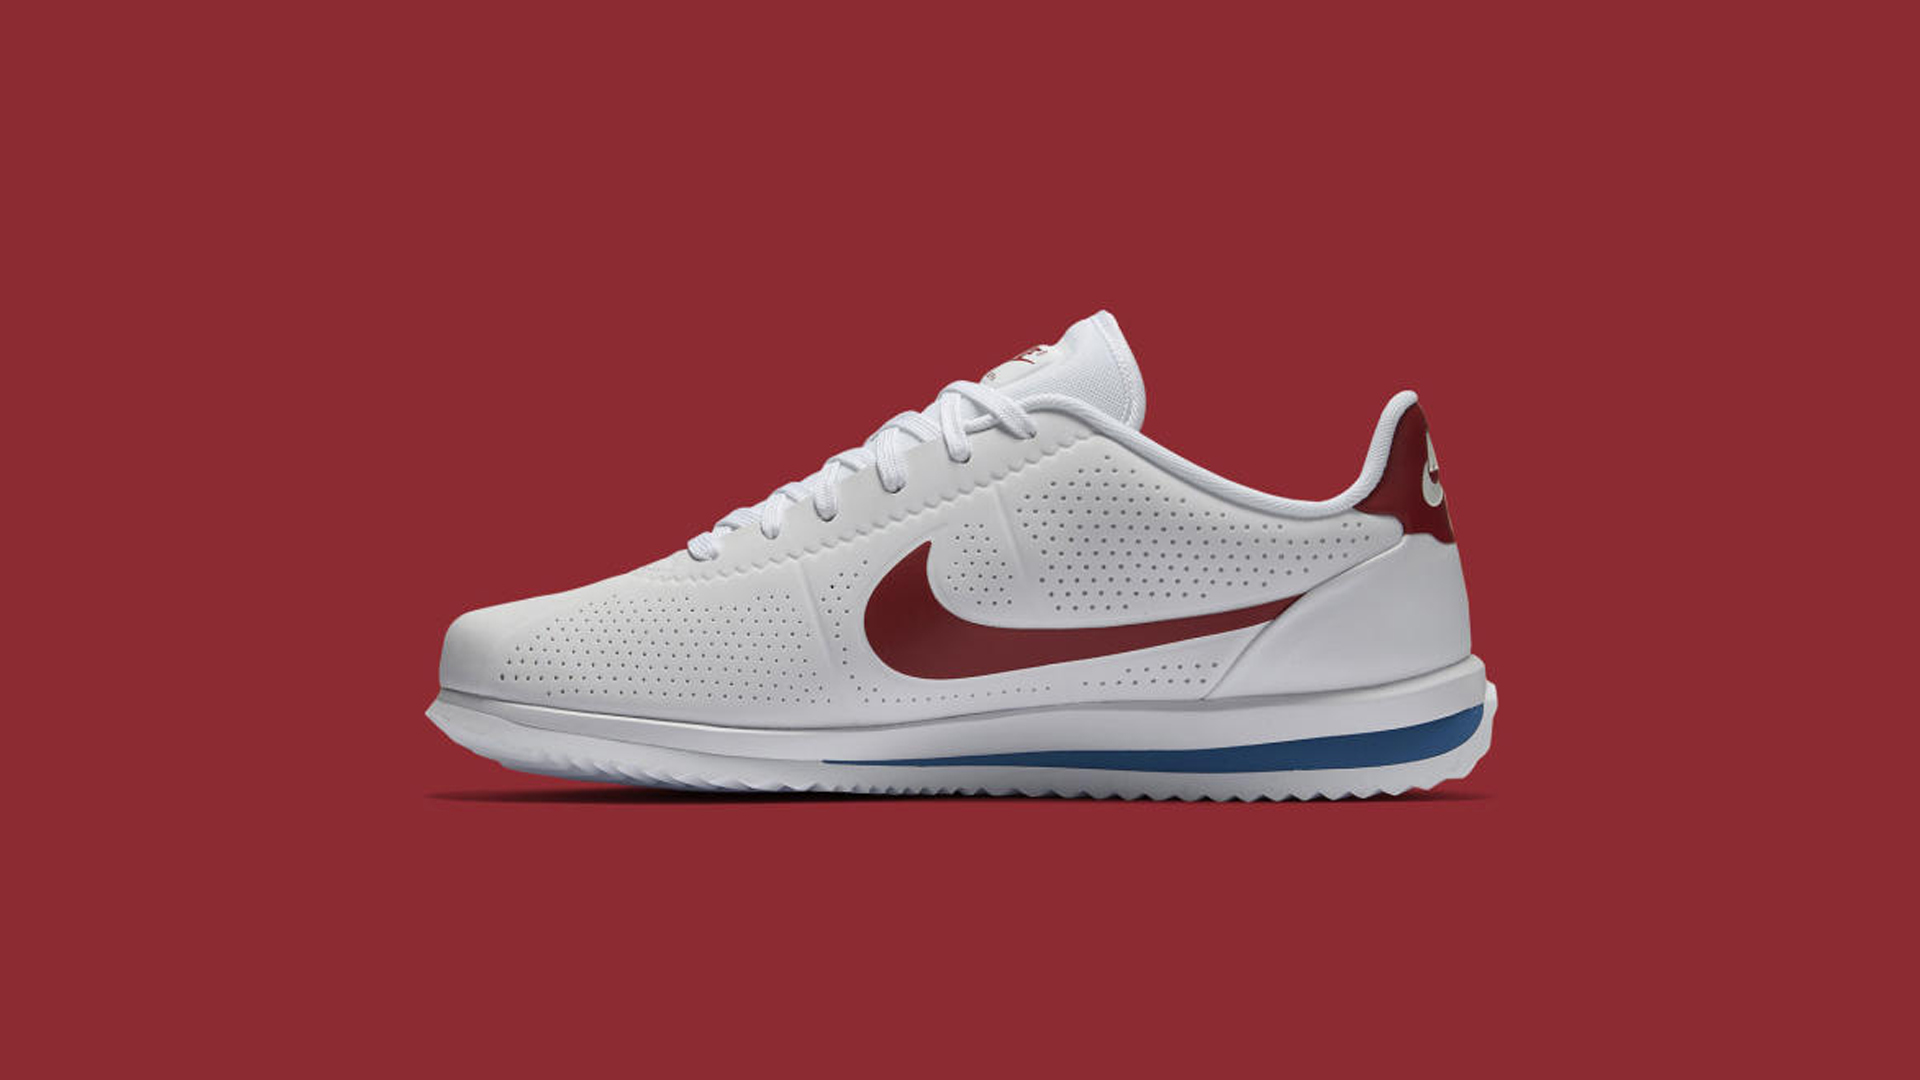 The Nike Cortez Ultra Moire is for the 